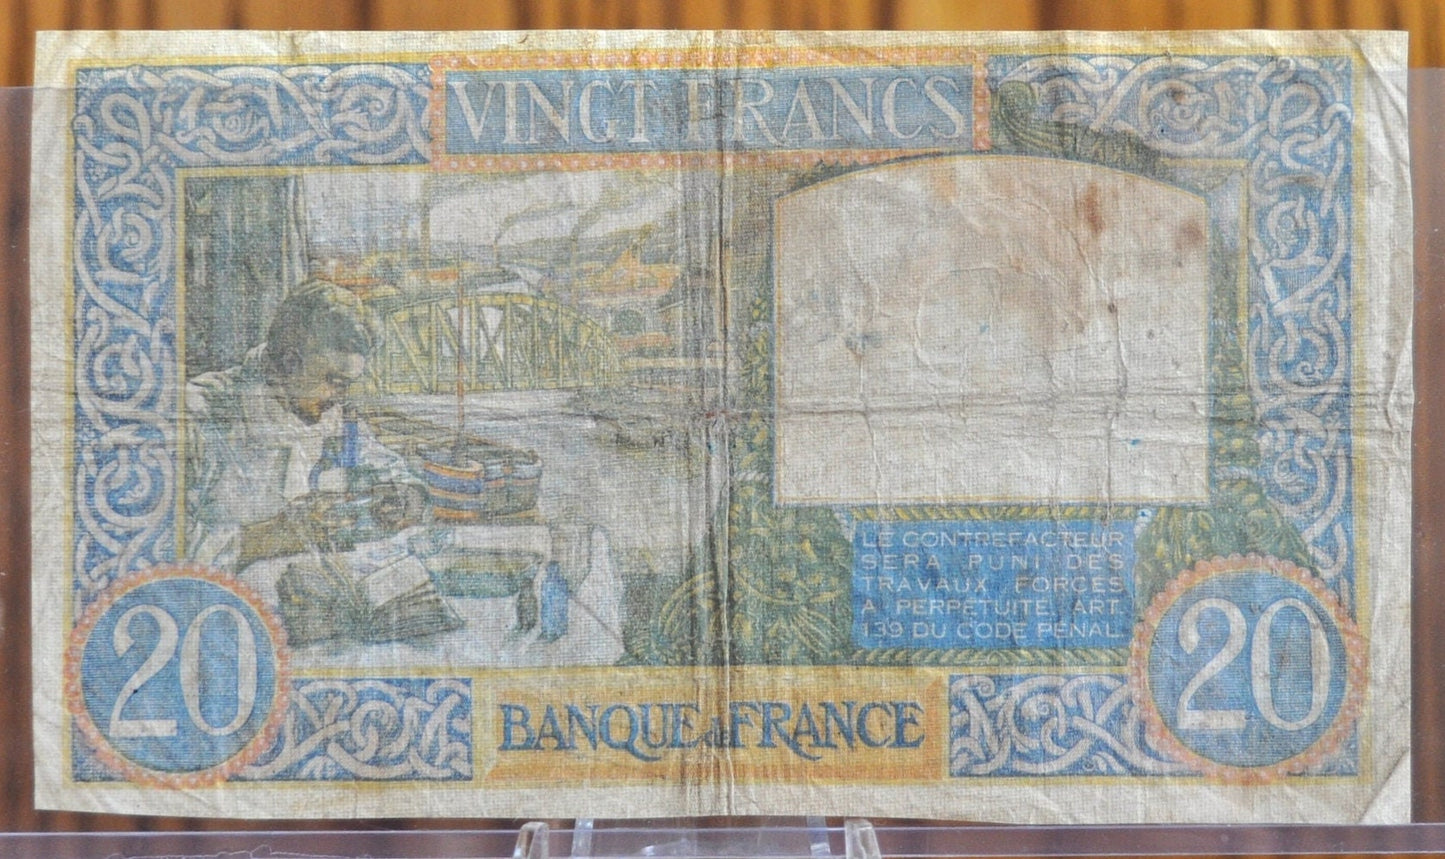 1941 France 20 Franc Banknote - Travail et Science Type - 20-2-1941 (February 20th 1941) - French Twenty Francs Banknote 1941 P#92b